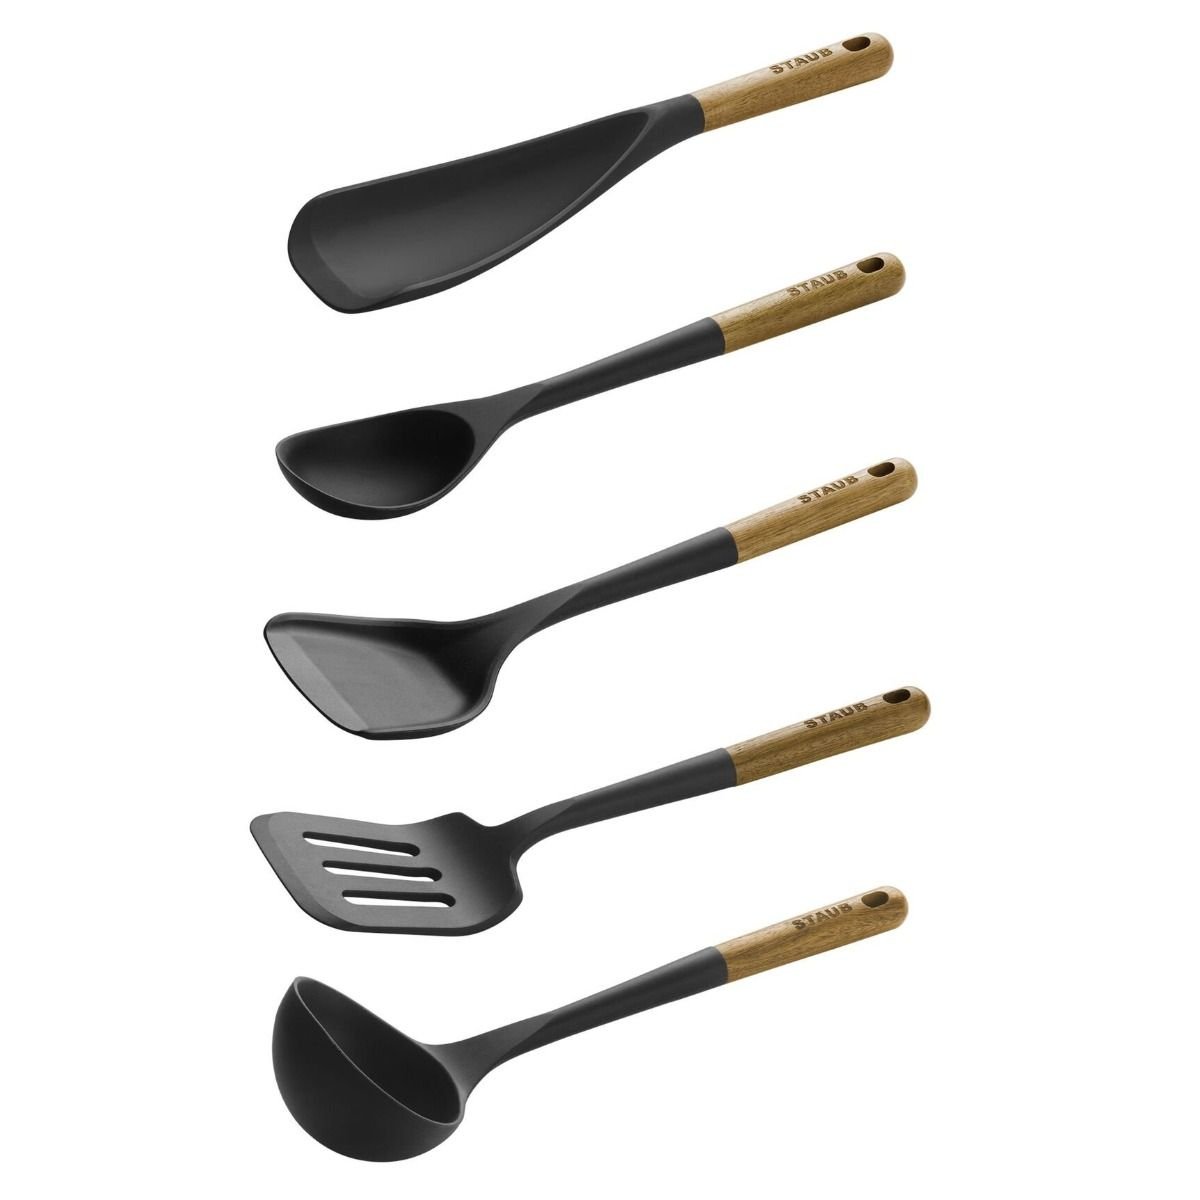 Honeybloom 5-Pack Assorted Wood & Silicone Kitchen Tools